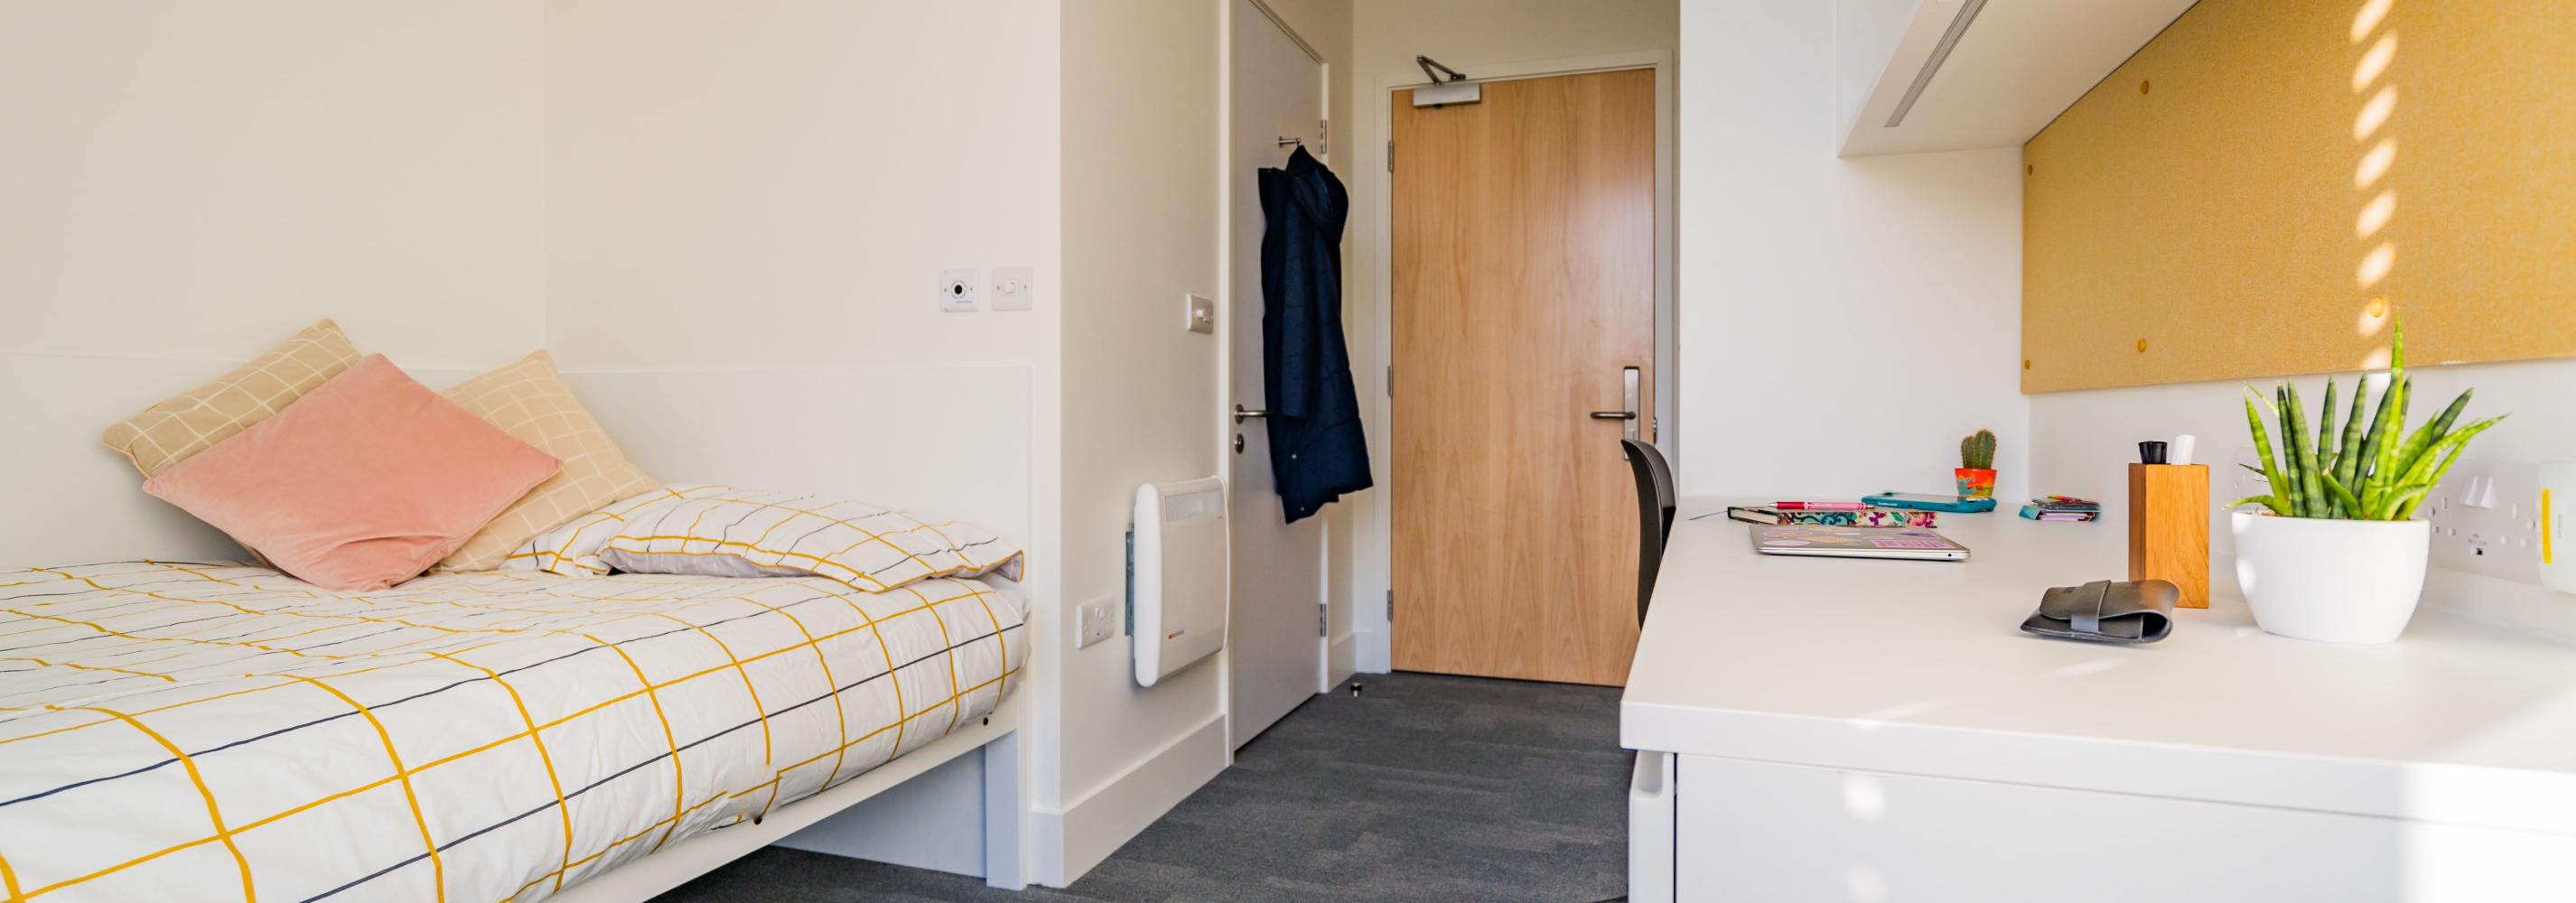 A single en suite room showing a small double bed against one wall and a desk and wardrobe against the opposite wall. The en suite shower room is behind the bed with the door to the en suite next to the door into the room